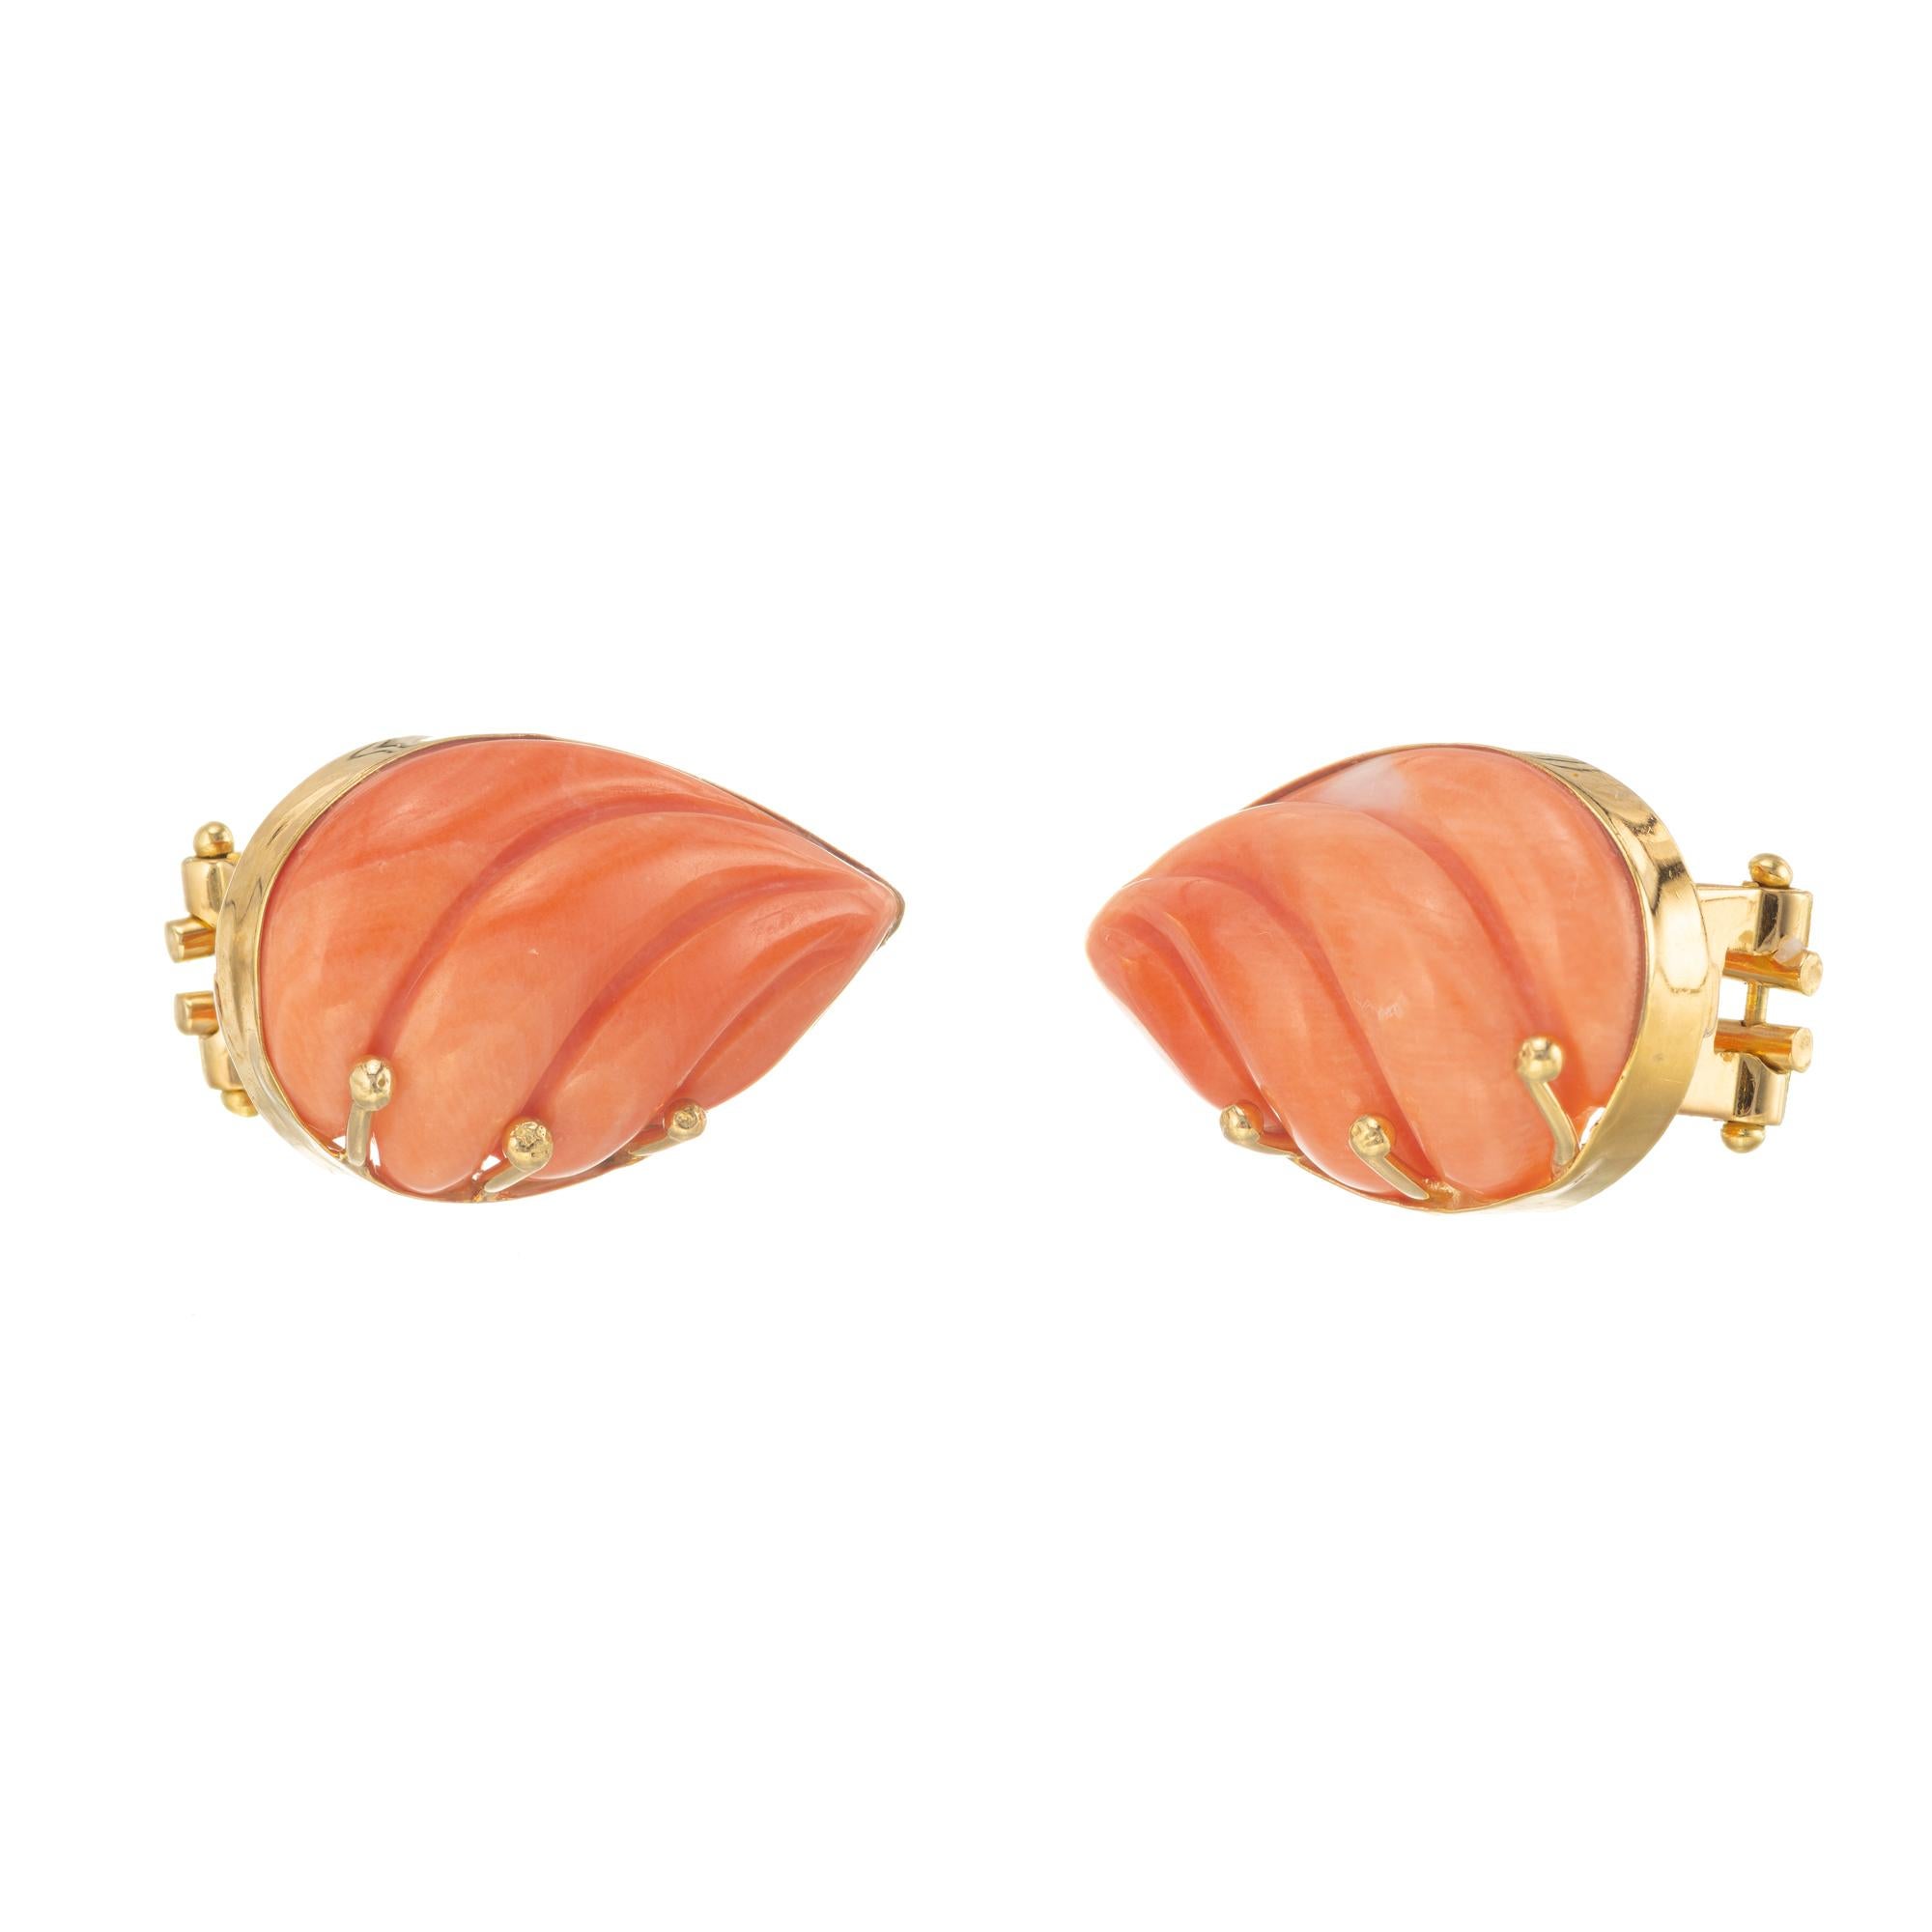 Vintage pink orange carved pear shape coral earrings. GIA certified natural untreated croal clip post earrings

2 carved pink orange pear shape coral GIA Certificate # 5202120585
18k yellow gold 
Stamped: 750
9.0 grams
Top to bottom: 20mm or 13/16